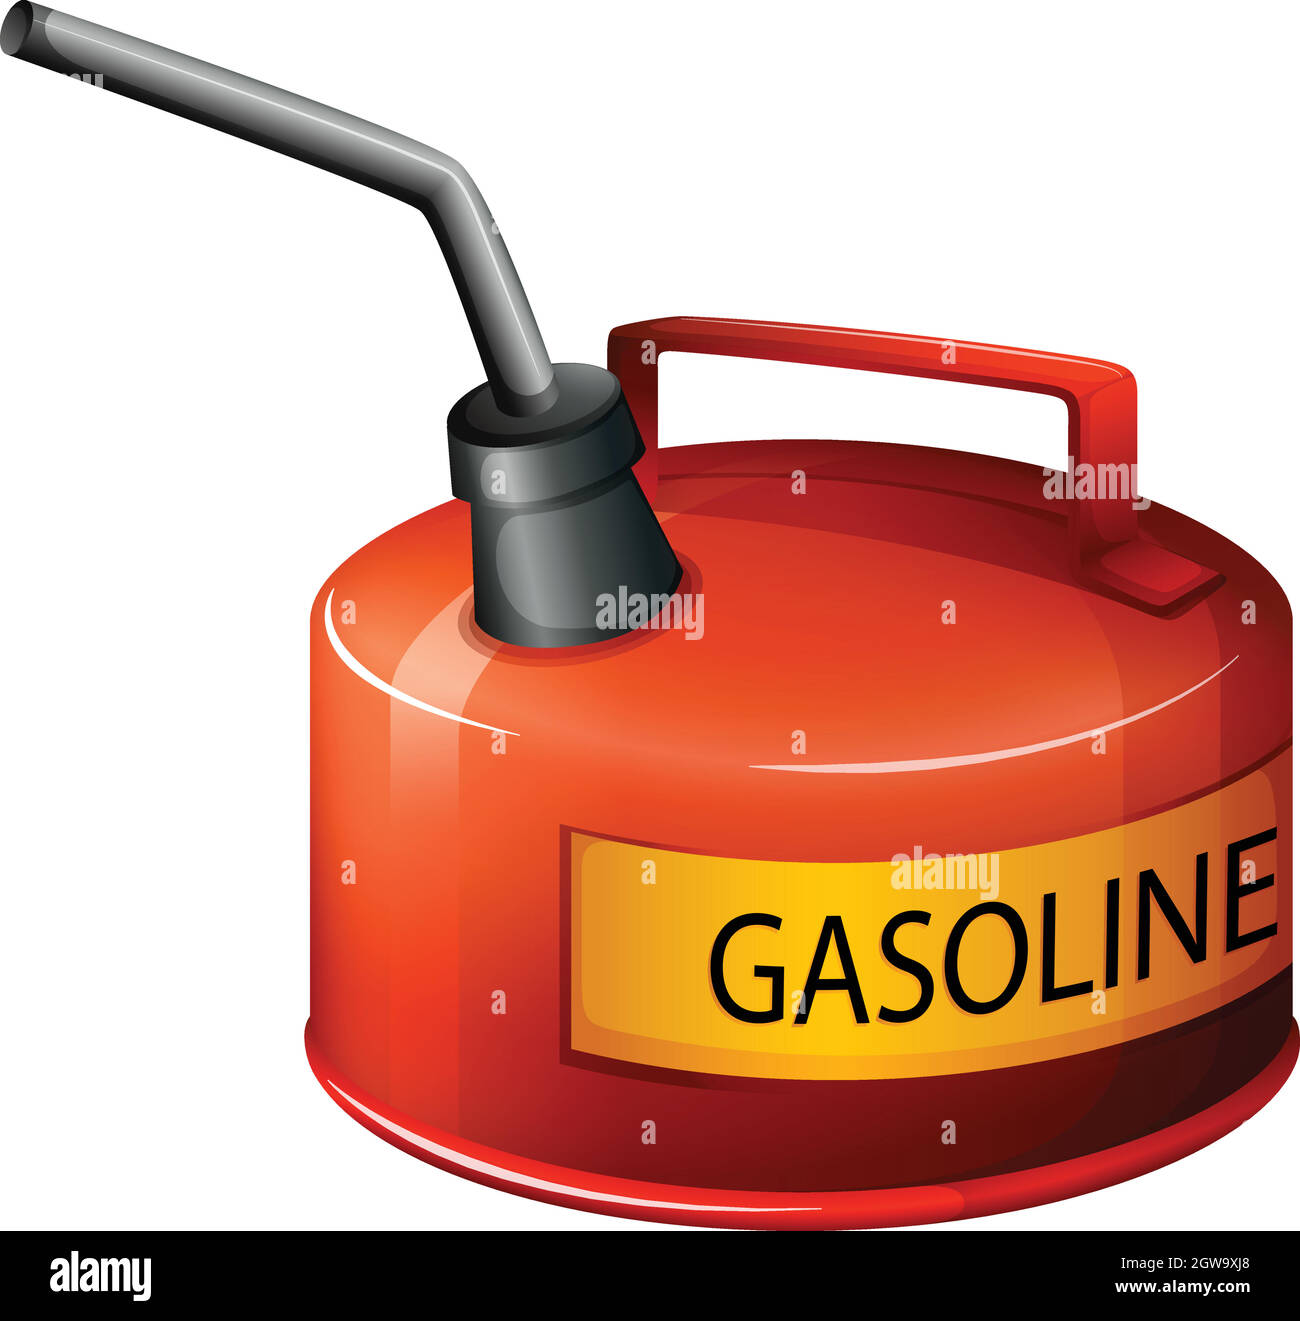 A red gasoline container Stock Vector